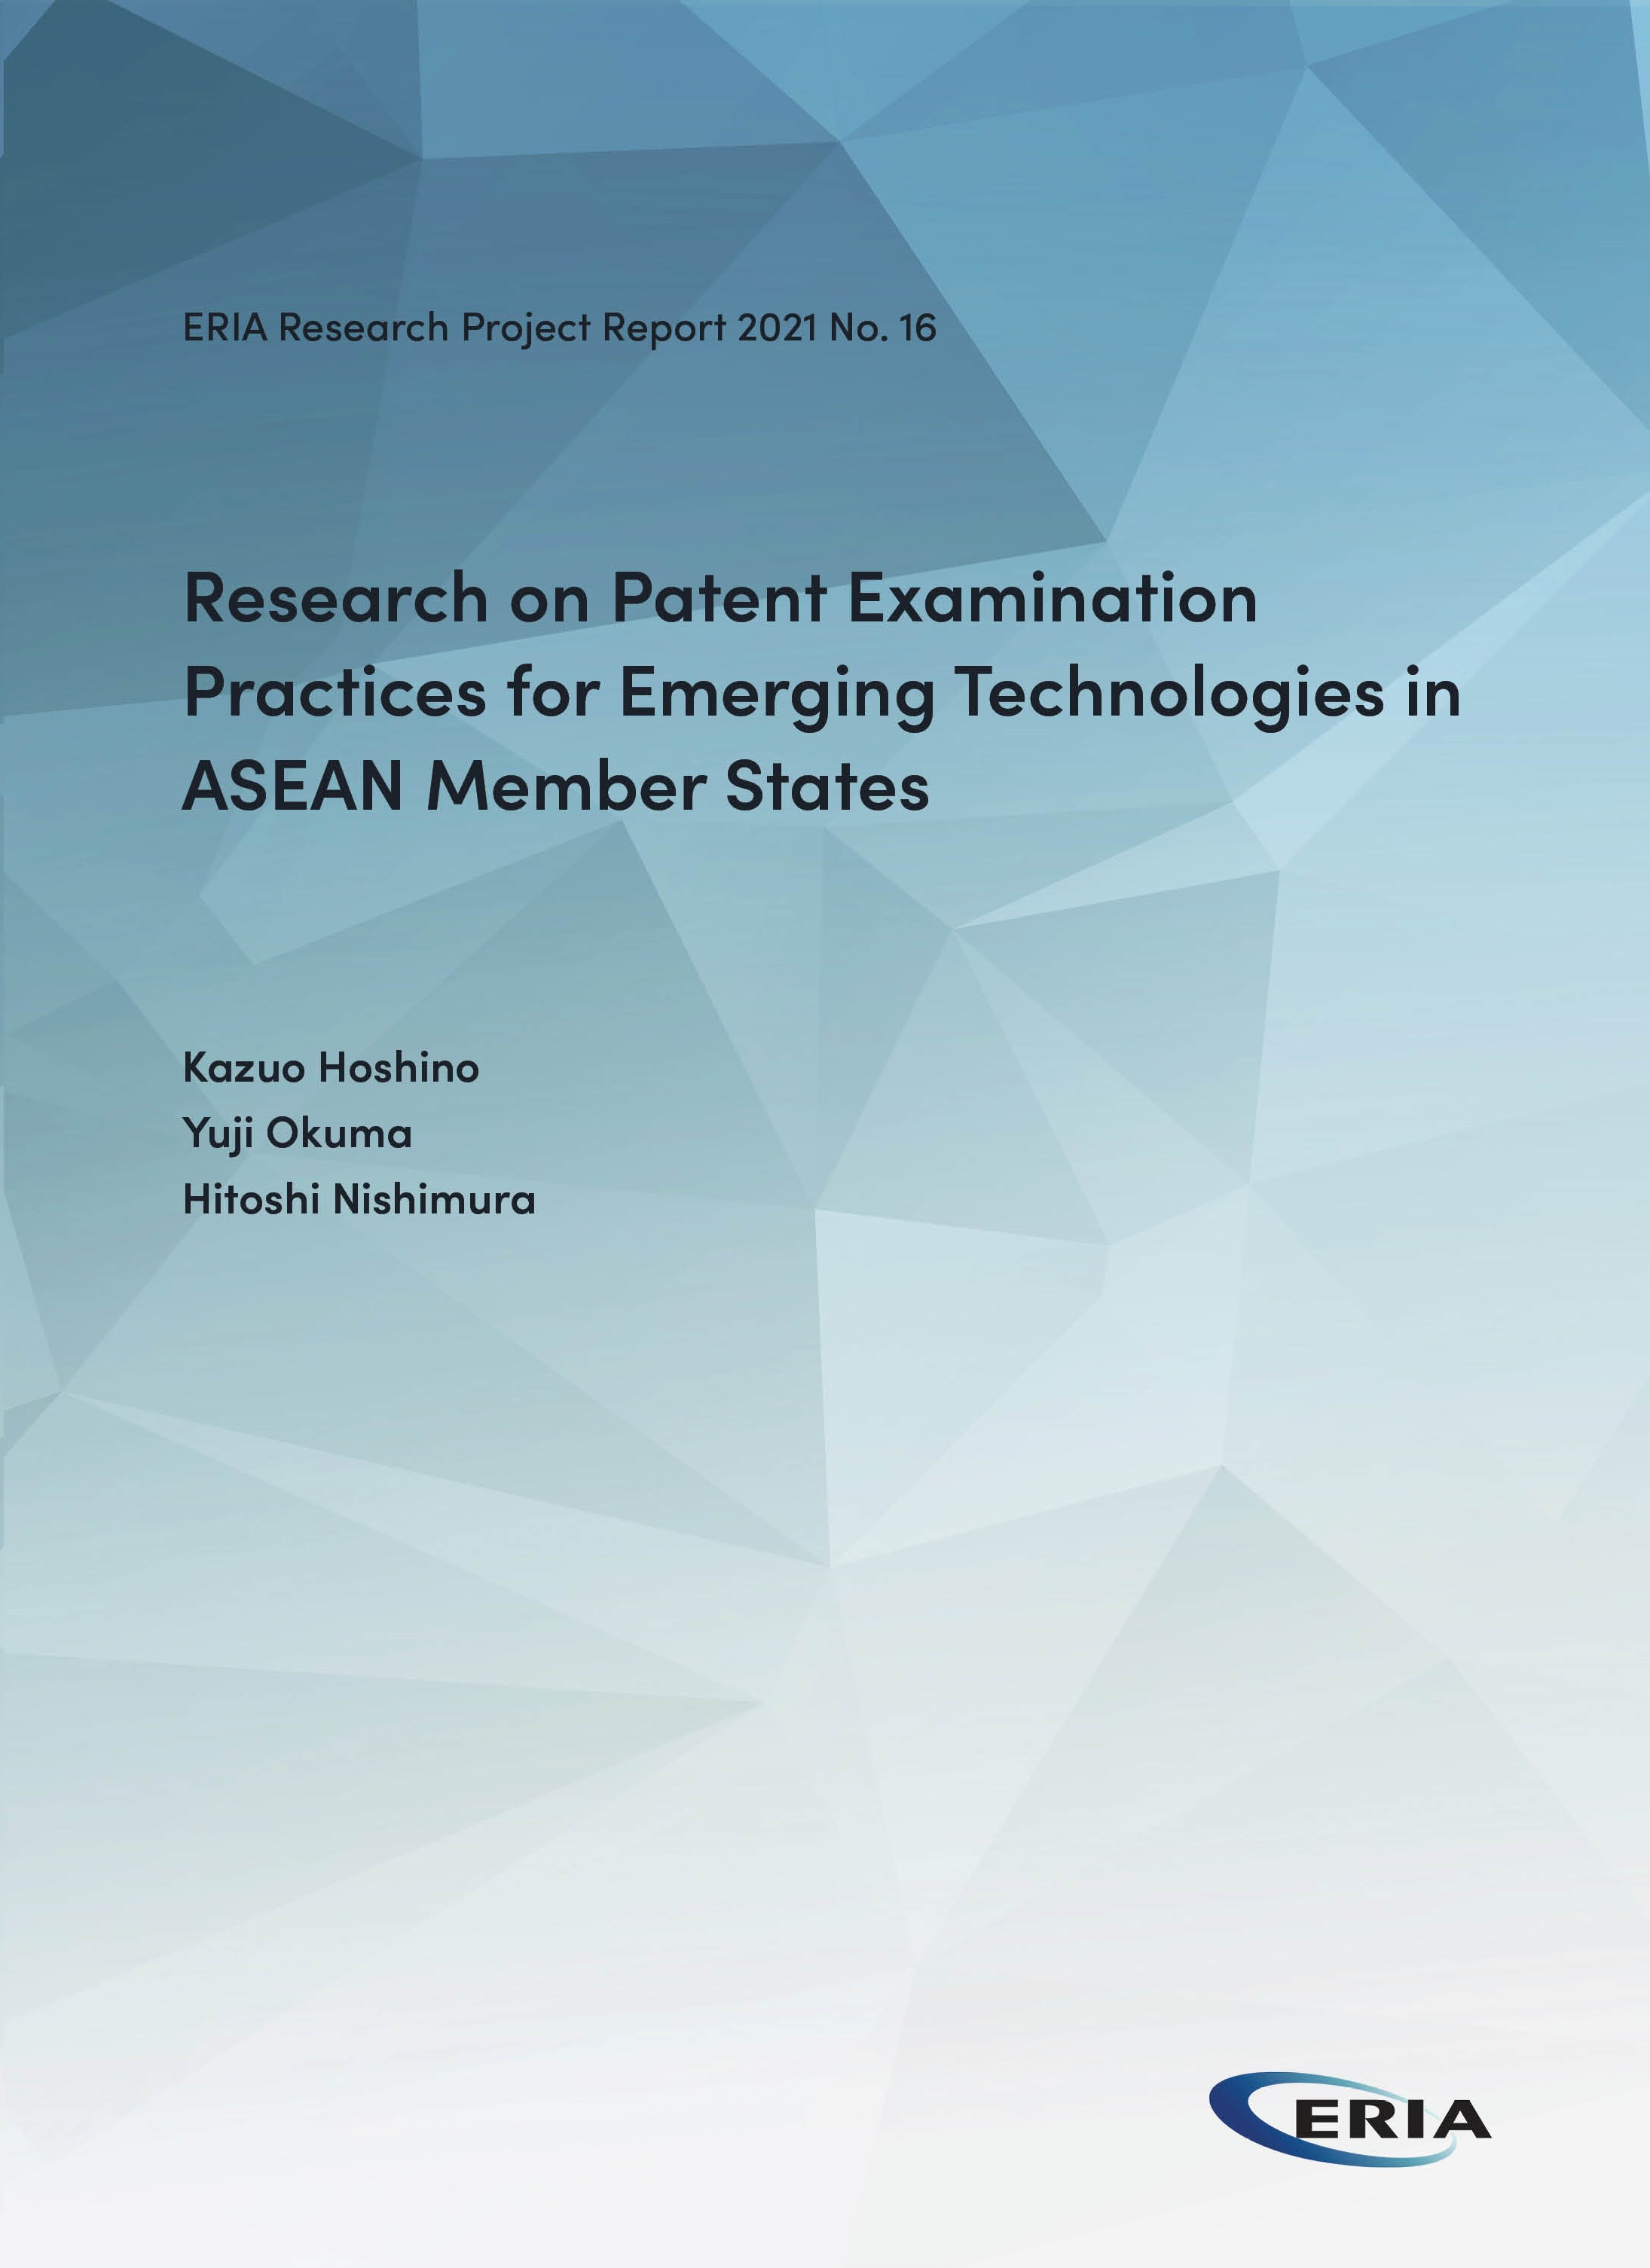 Research on Patent Examination Practices for Emerging Technologies in ASEAN Member States